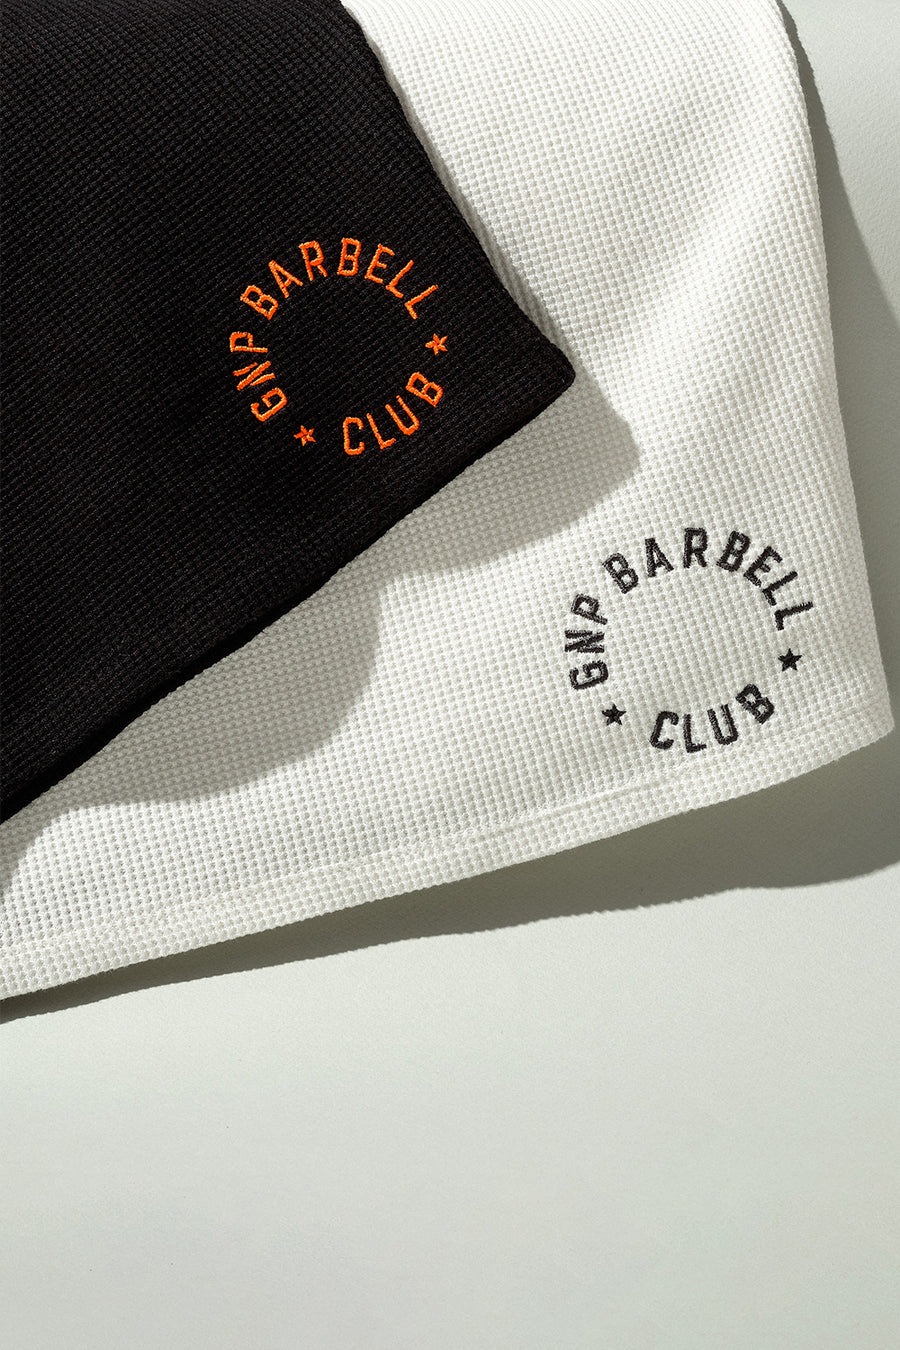 GNP Barbell Club White Waffle T-shirt